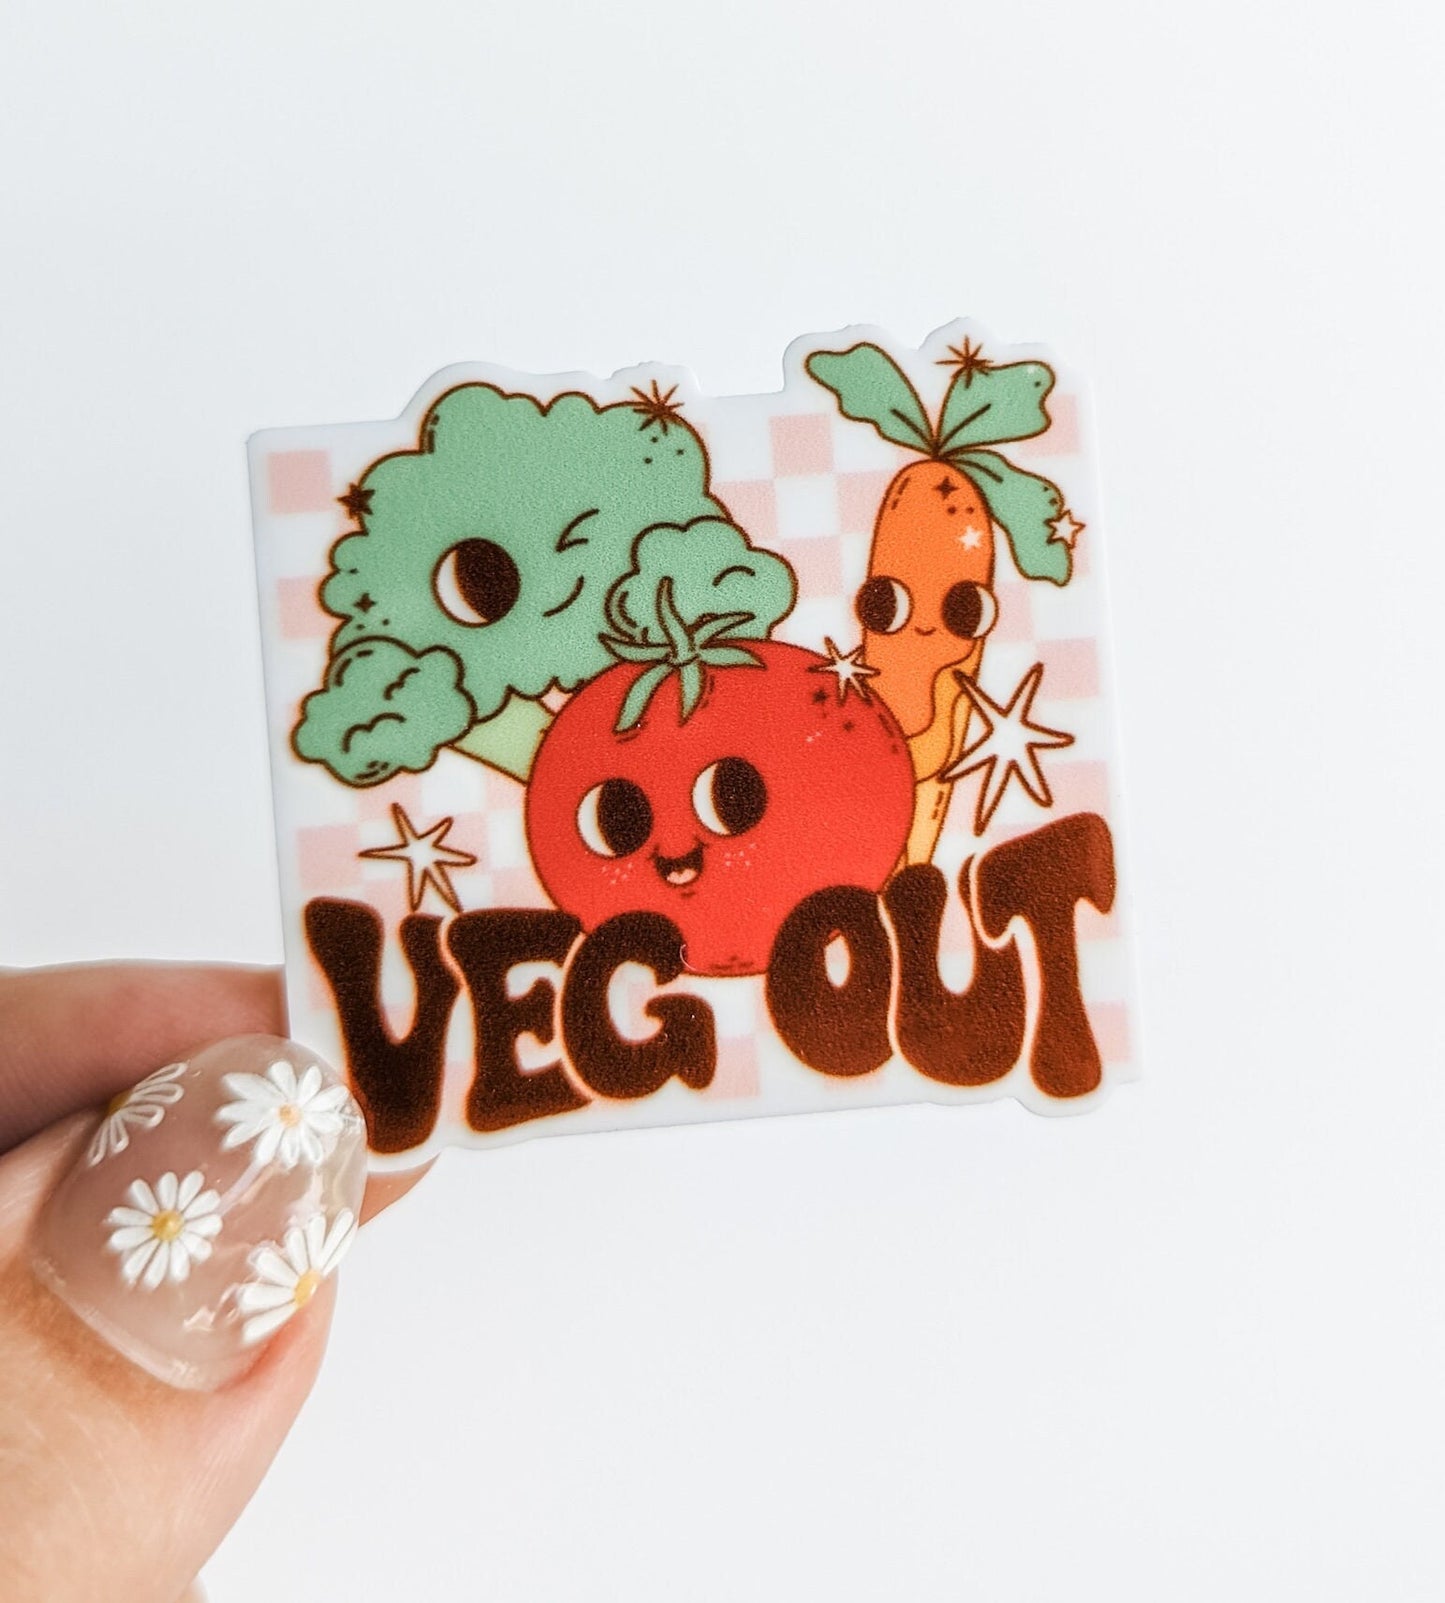 Veg Out Dietician / PLASTIC Add on / 11A37